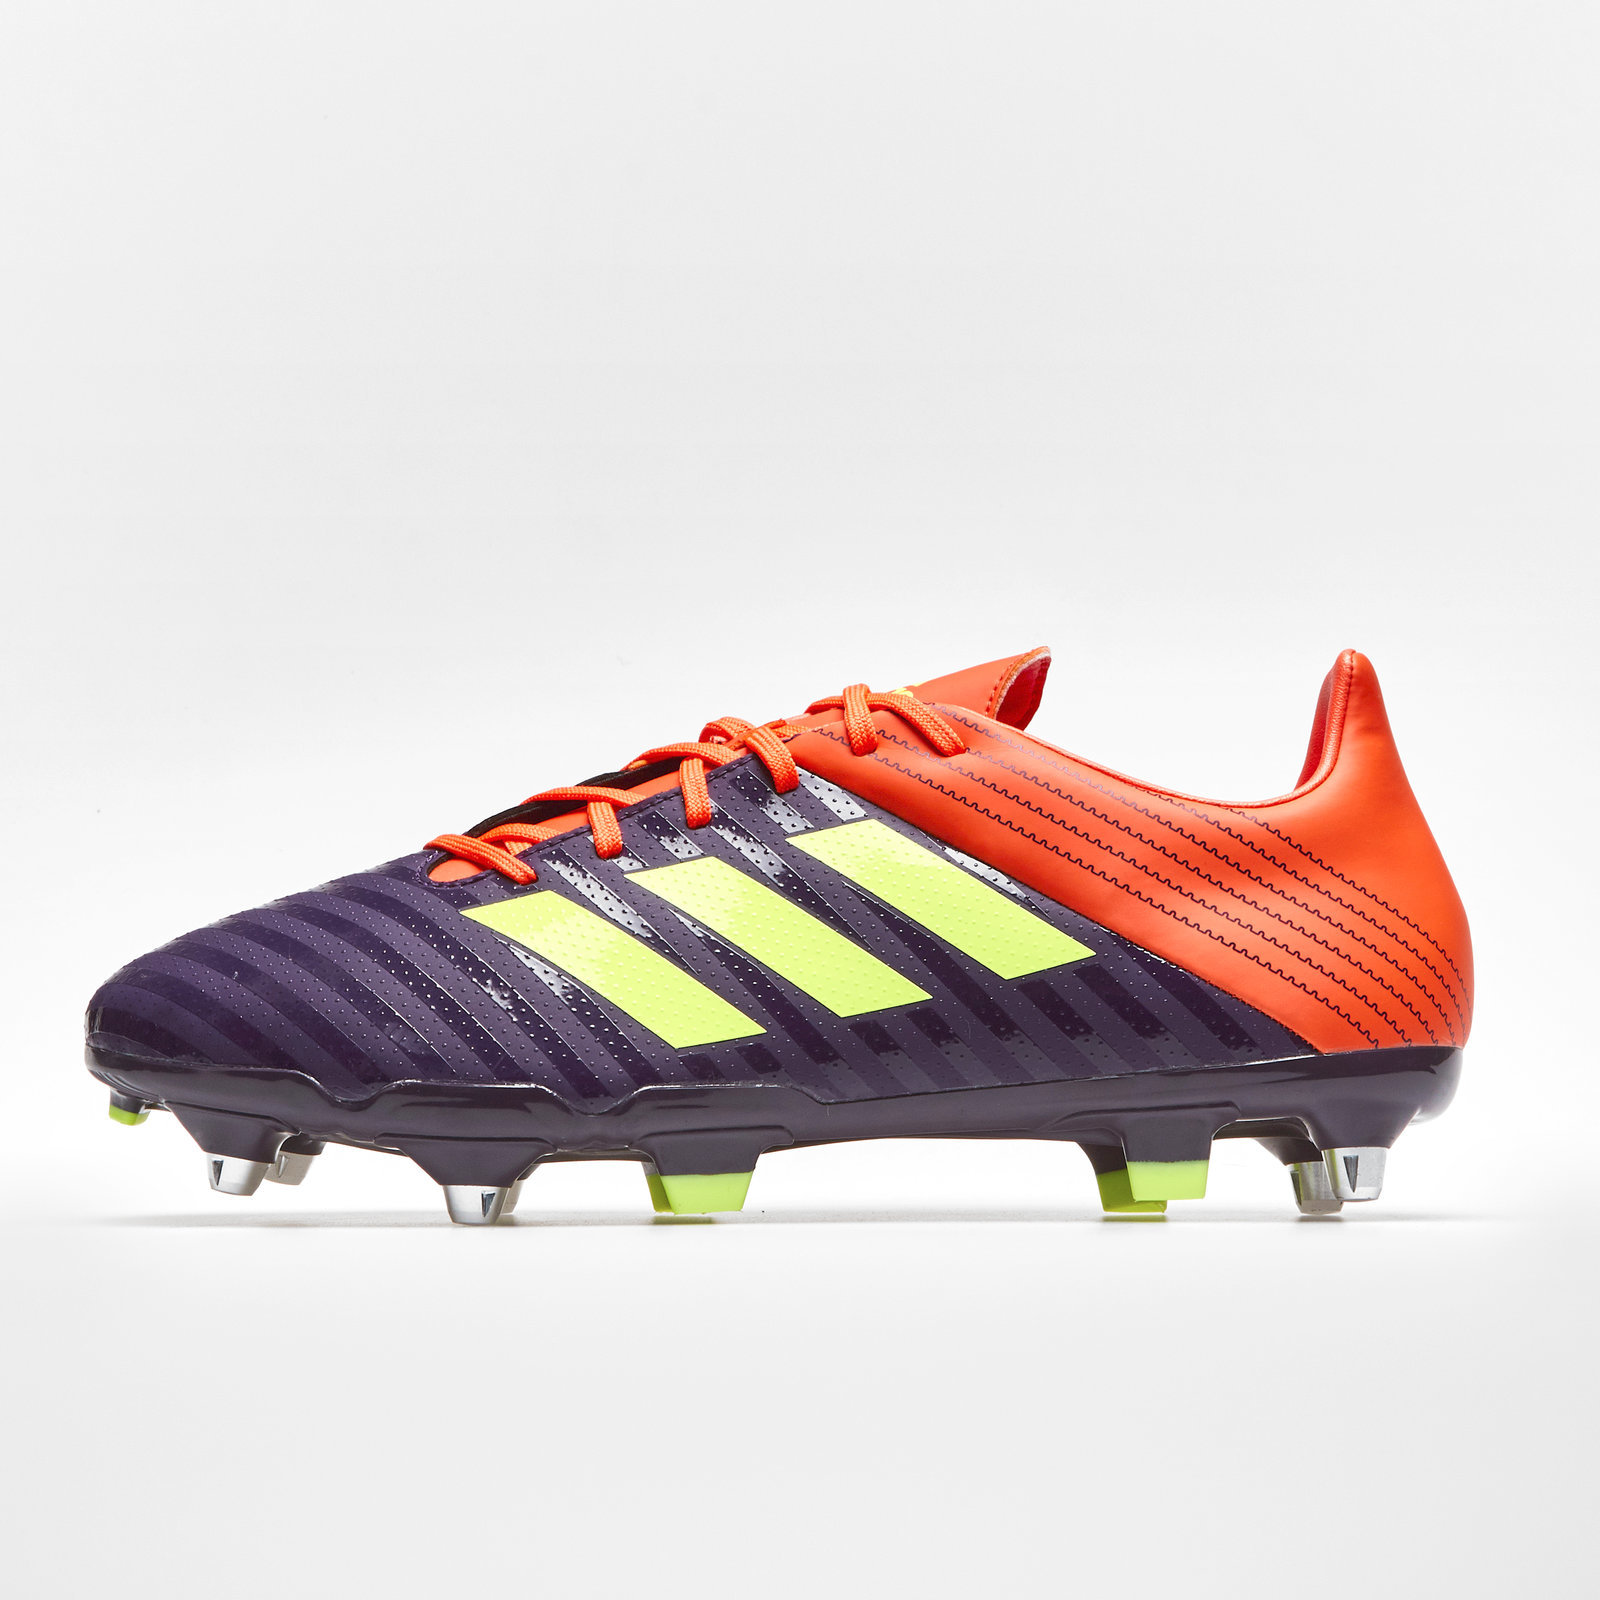 adidas long rugby studs